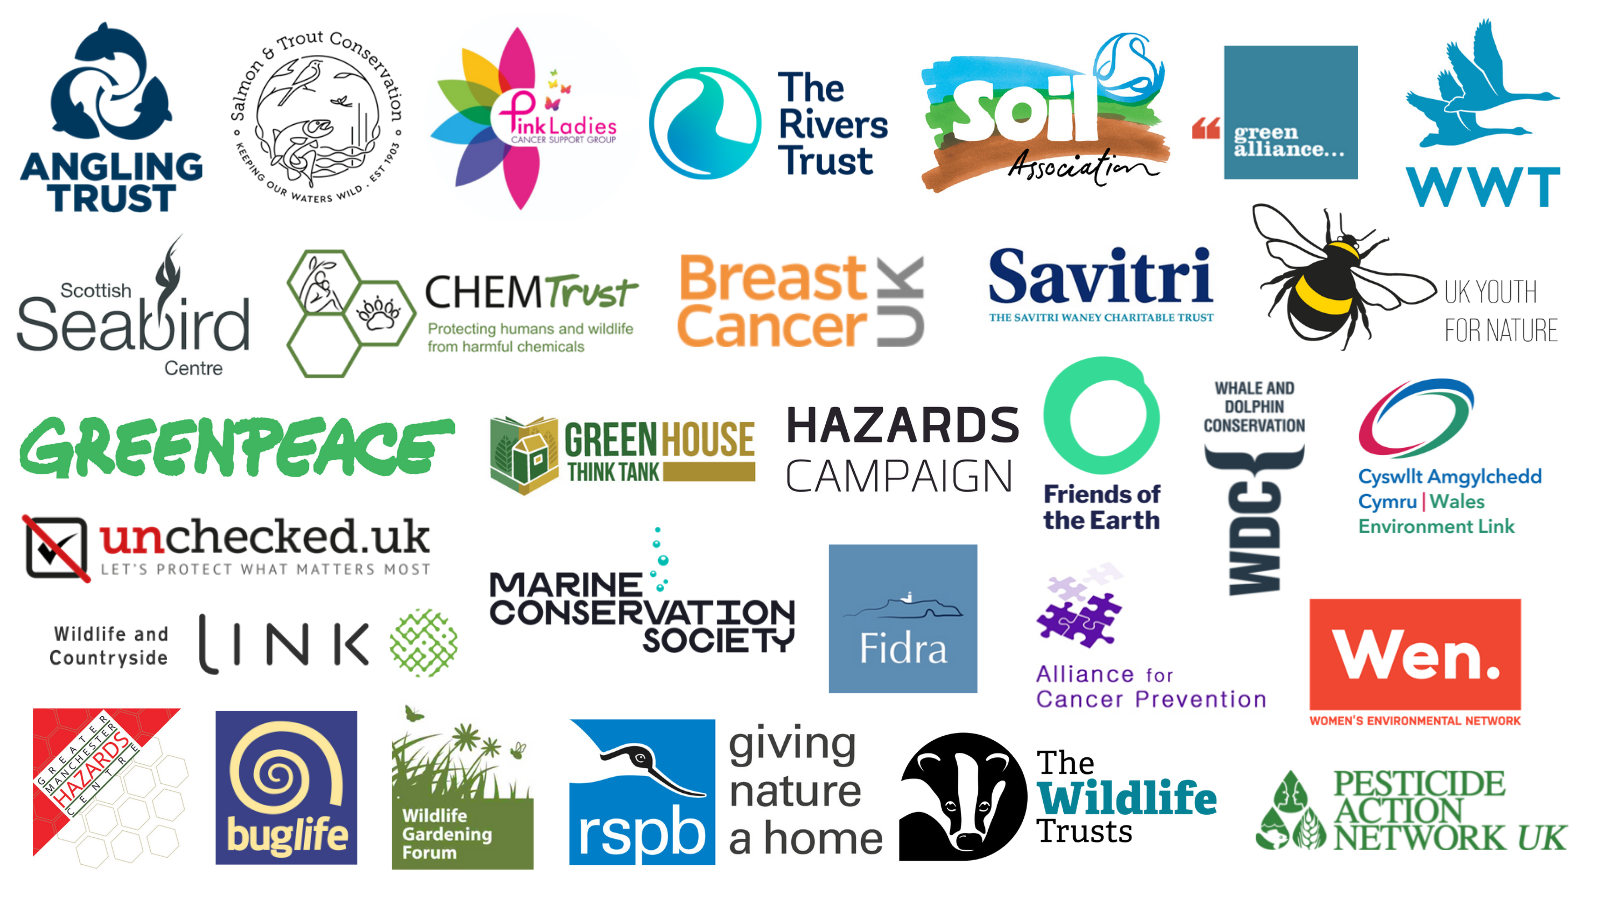 30 civil society organisations call on Defra to act on PFAS, ‘Forever Chemicals’